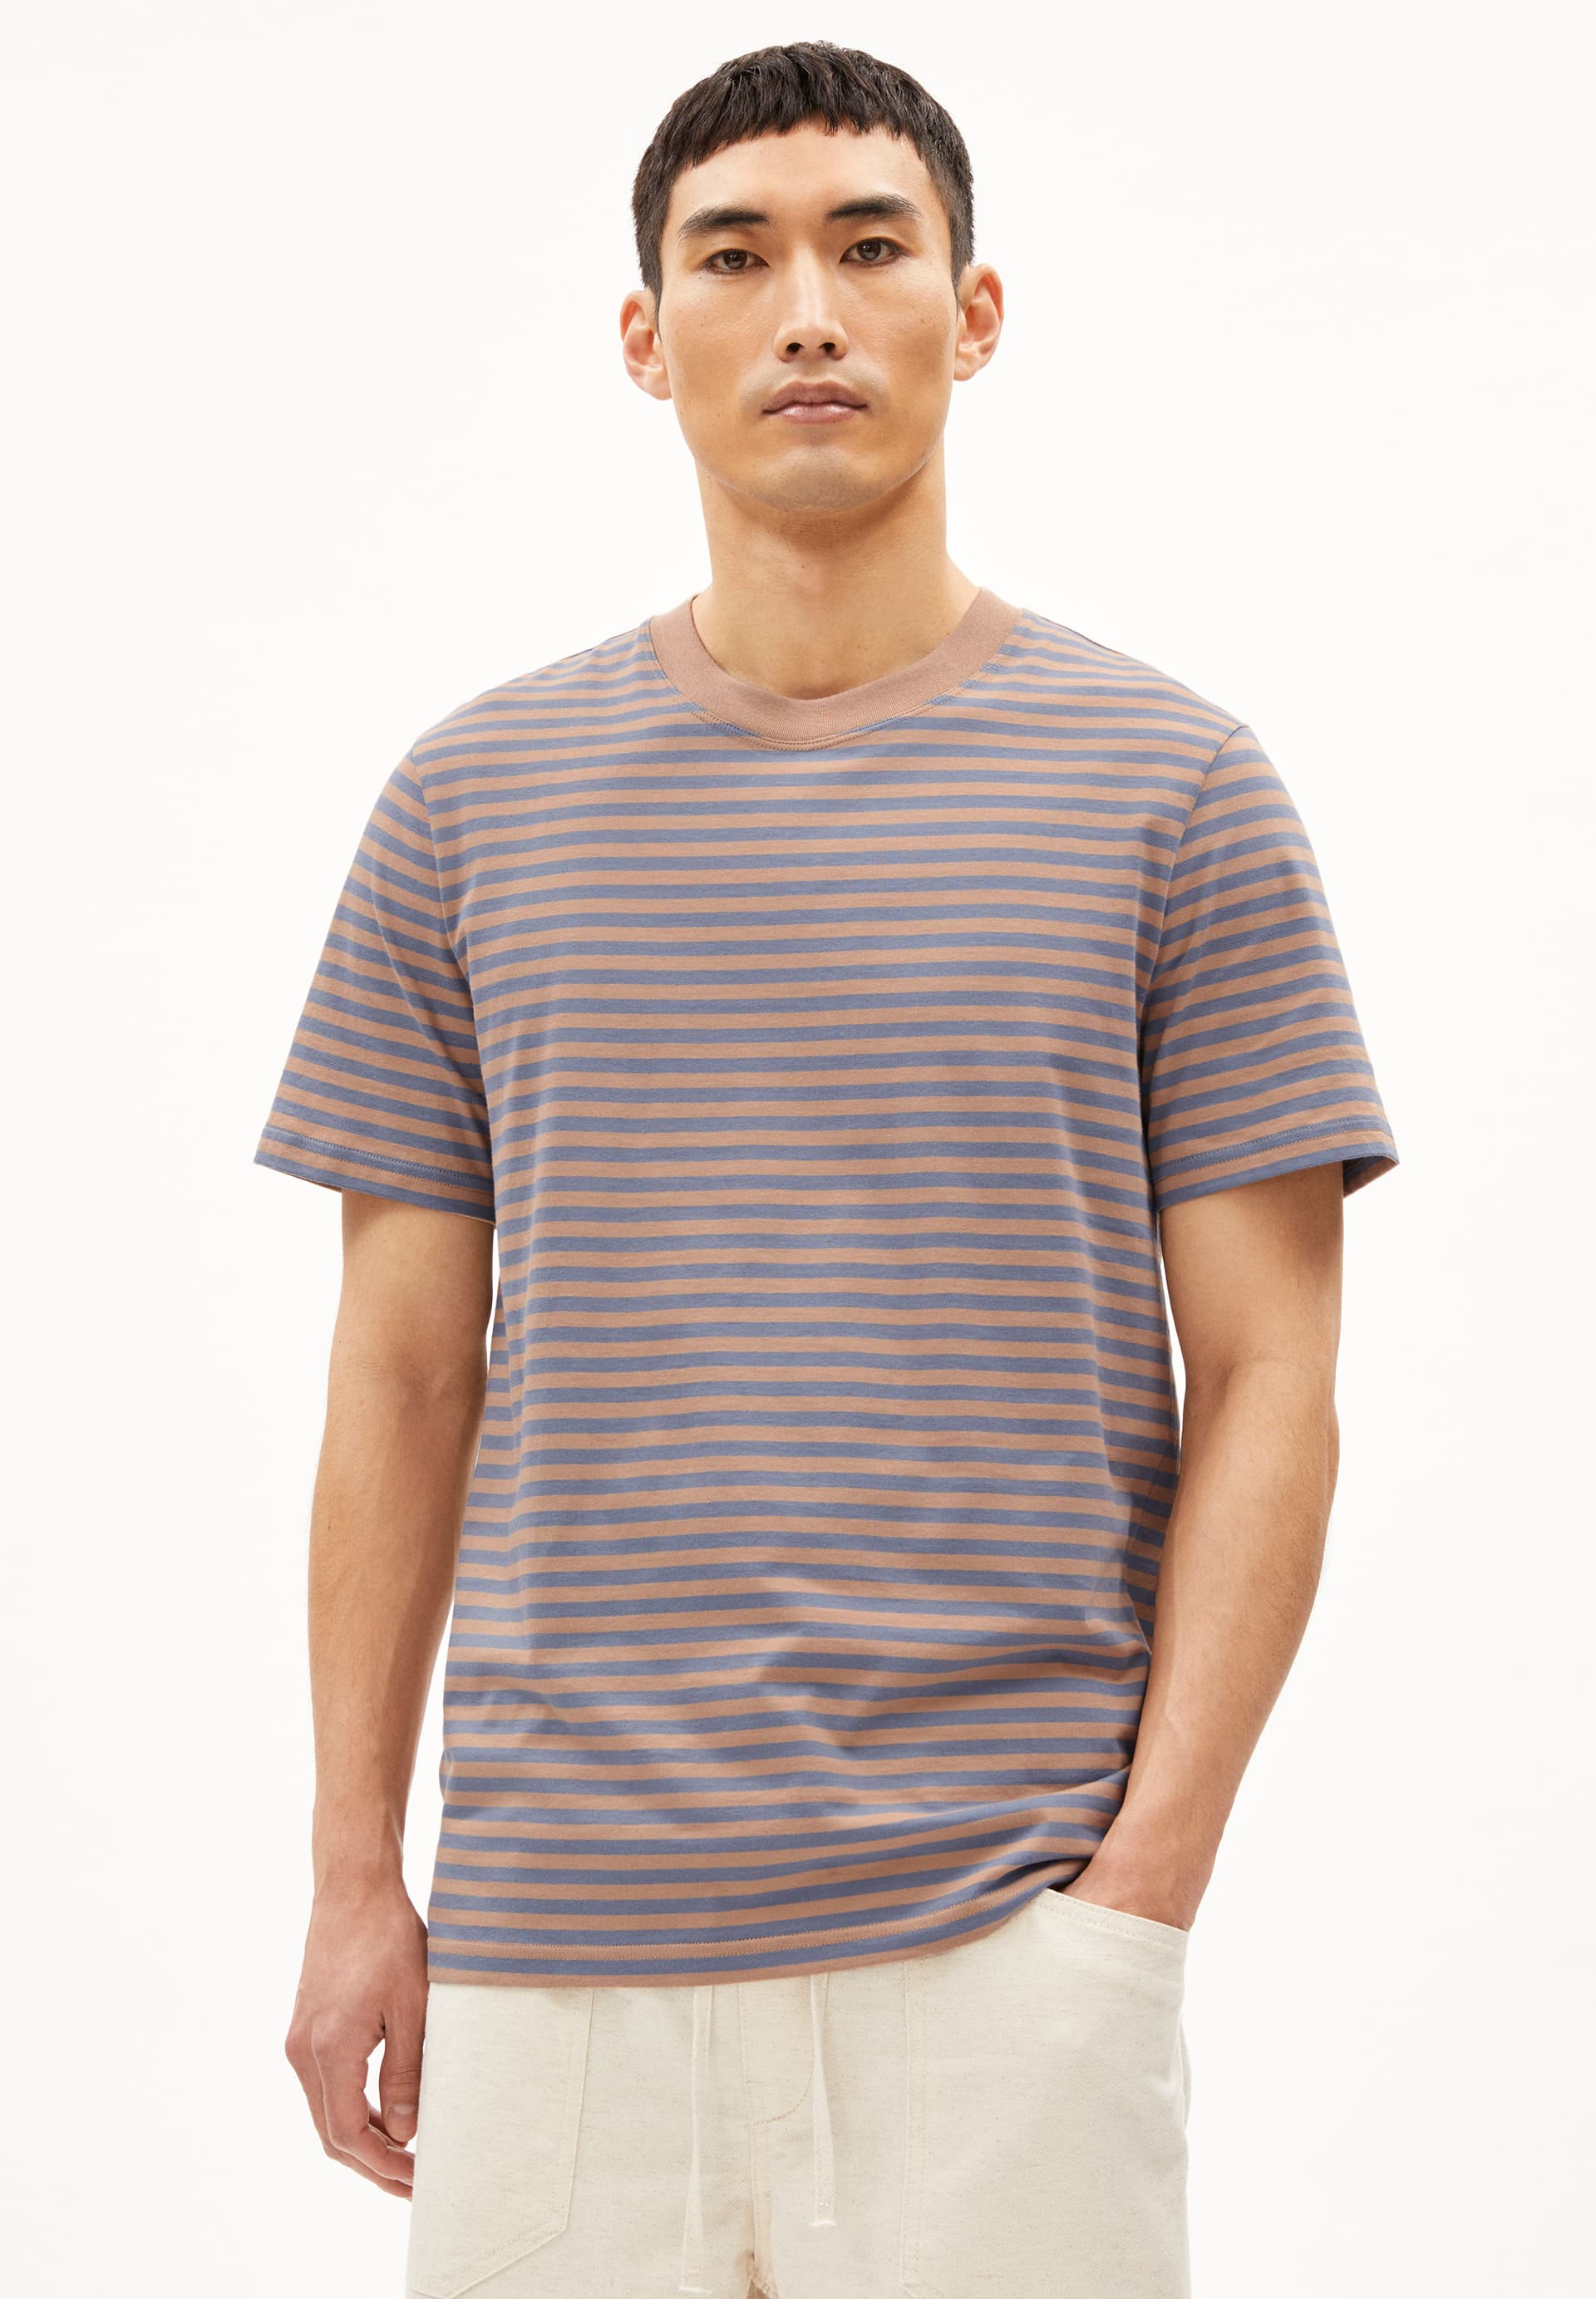 VEGAAS STRIPES T-Shirt Relaxed Fit made of Organic Cotton